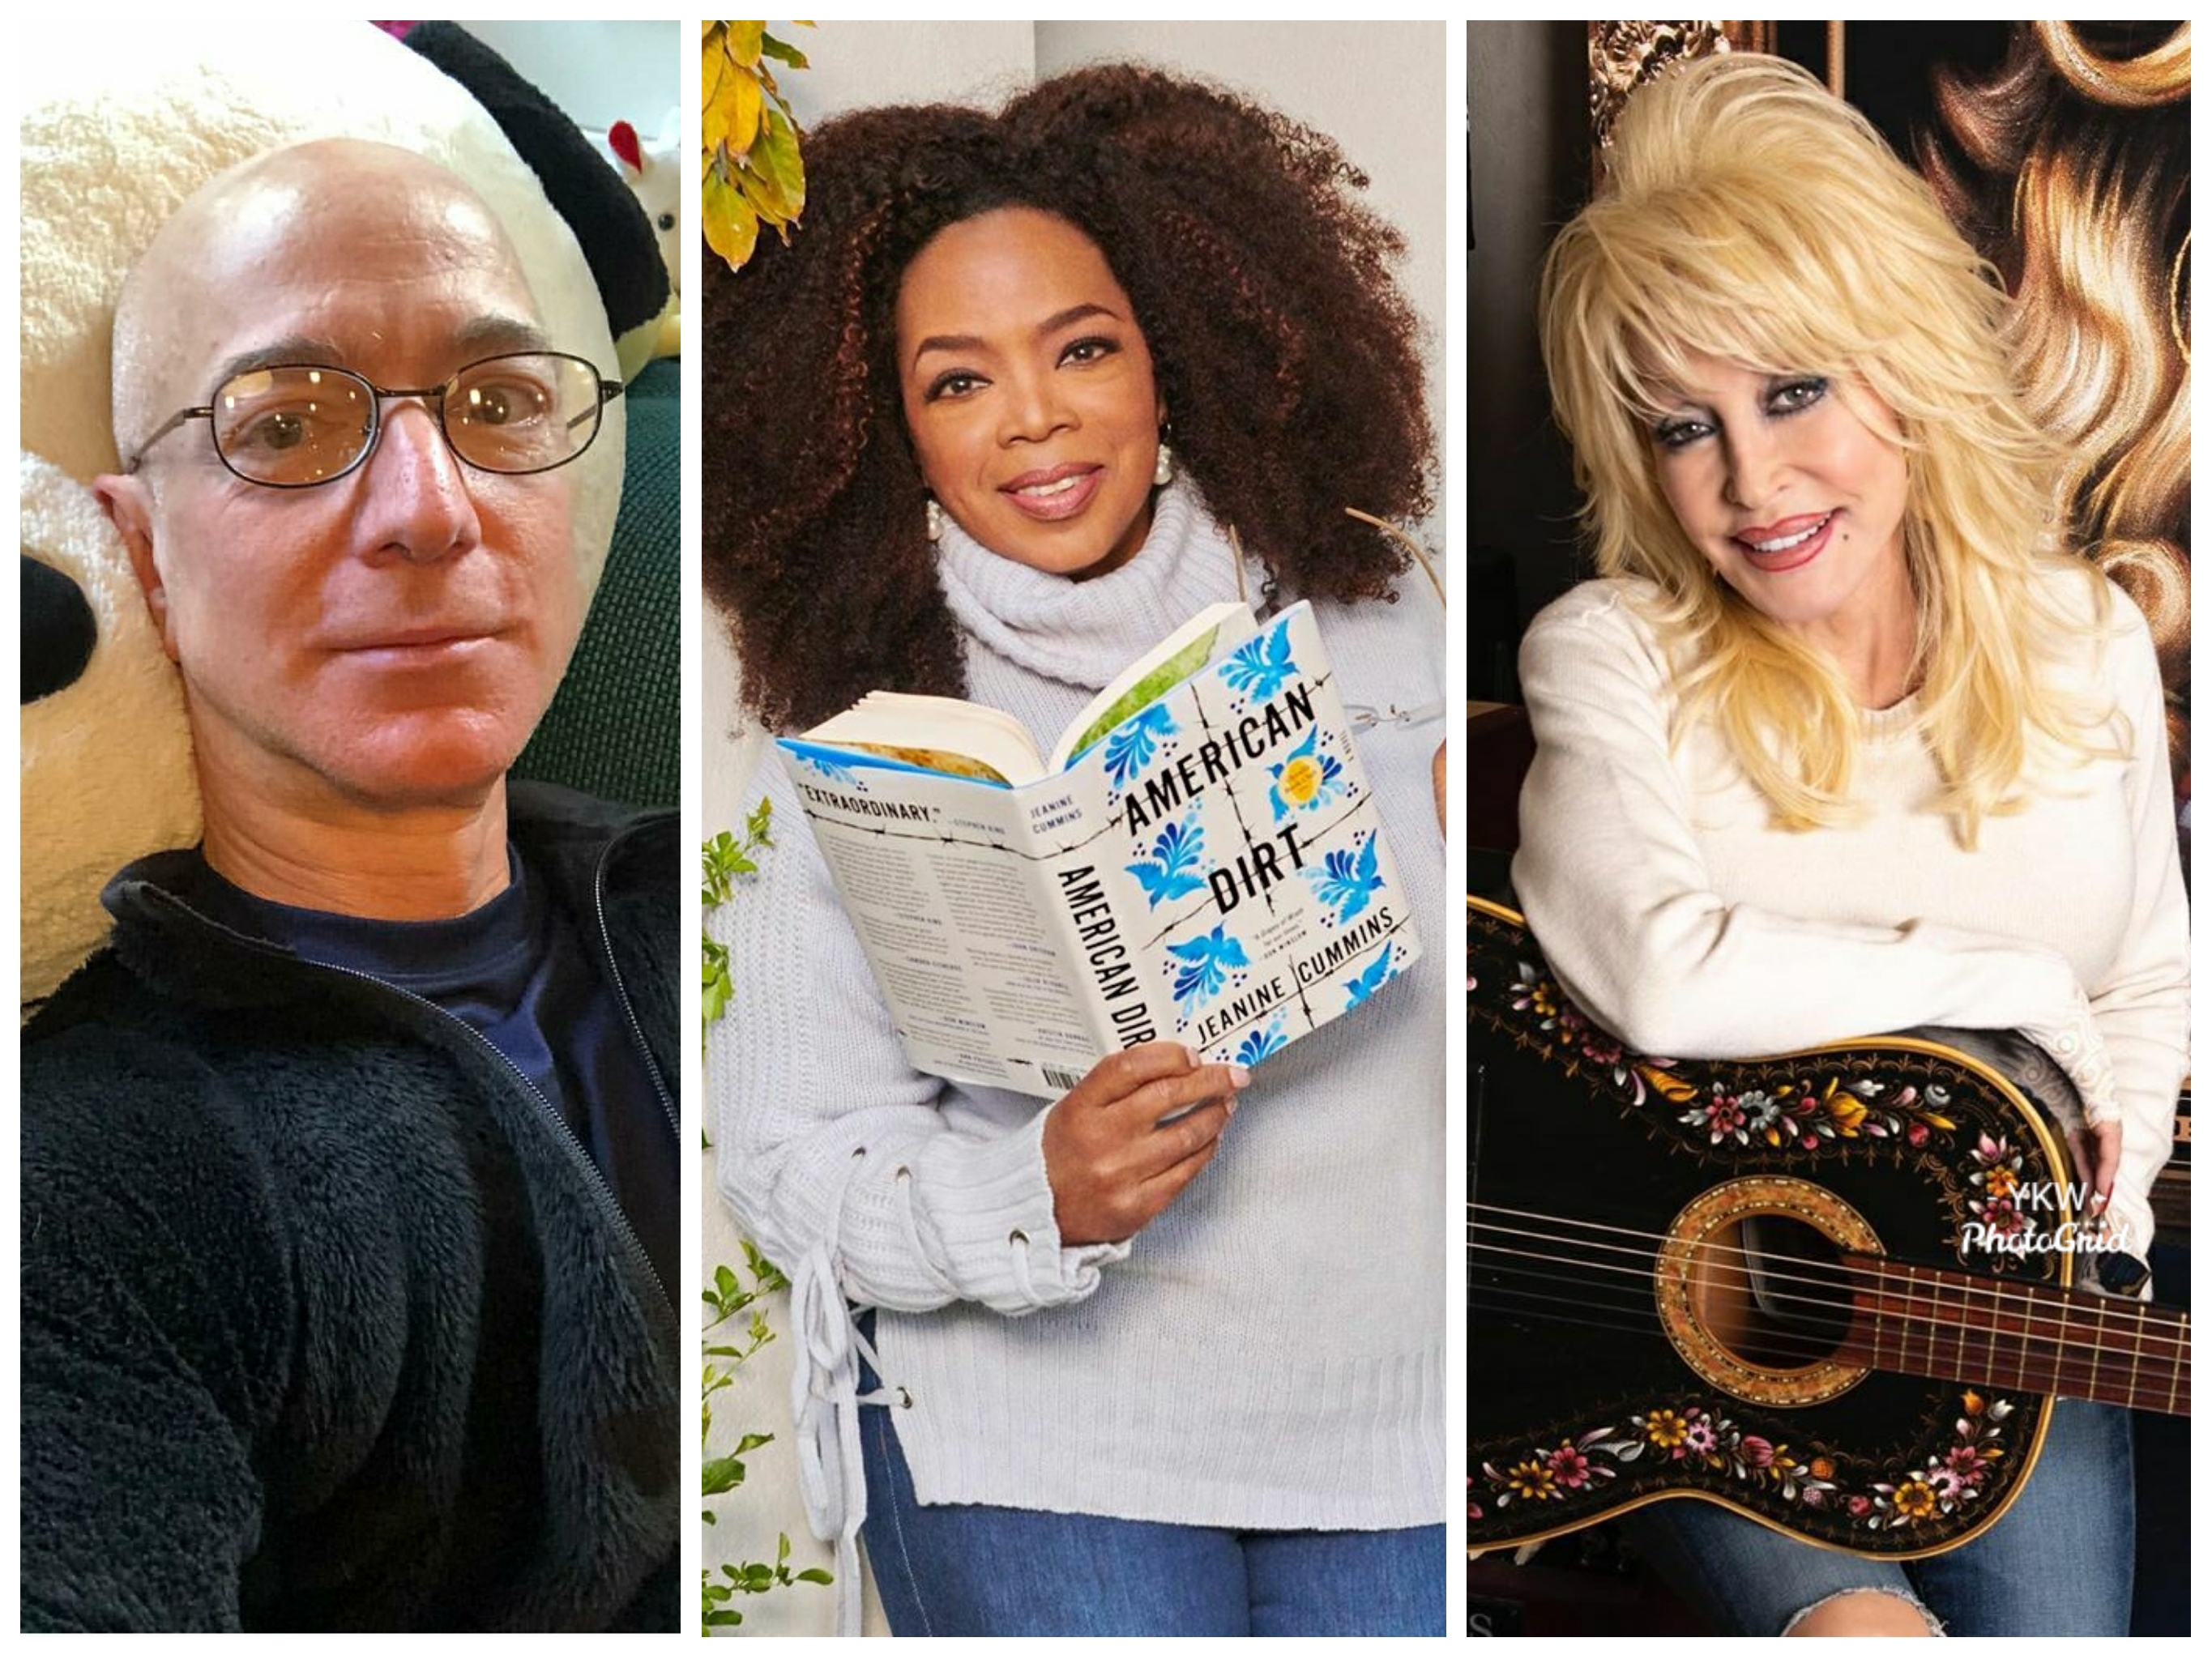 Jeff Bezos, Oprah Winfrey, And Dolly Parton Donate Millions Of Dollars For Coronavirus Relief Efforts And Cure Research